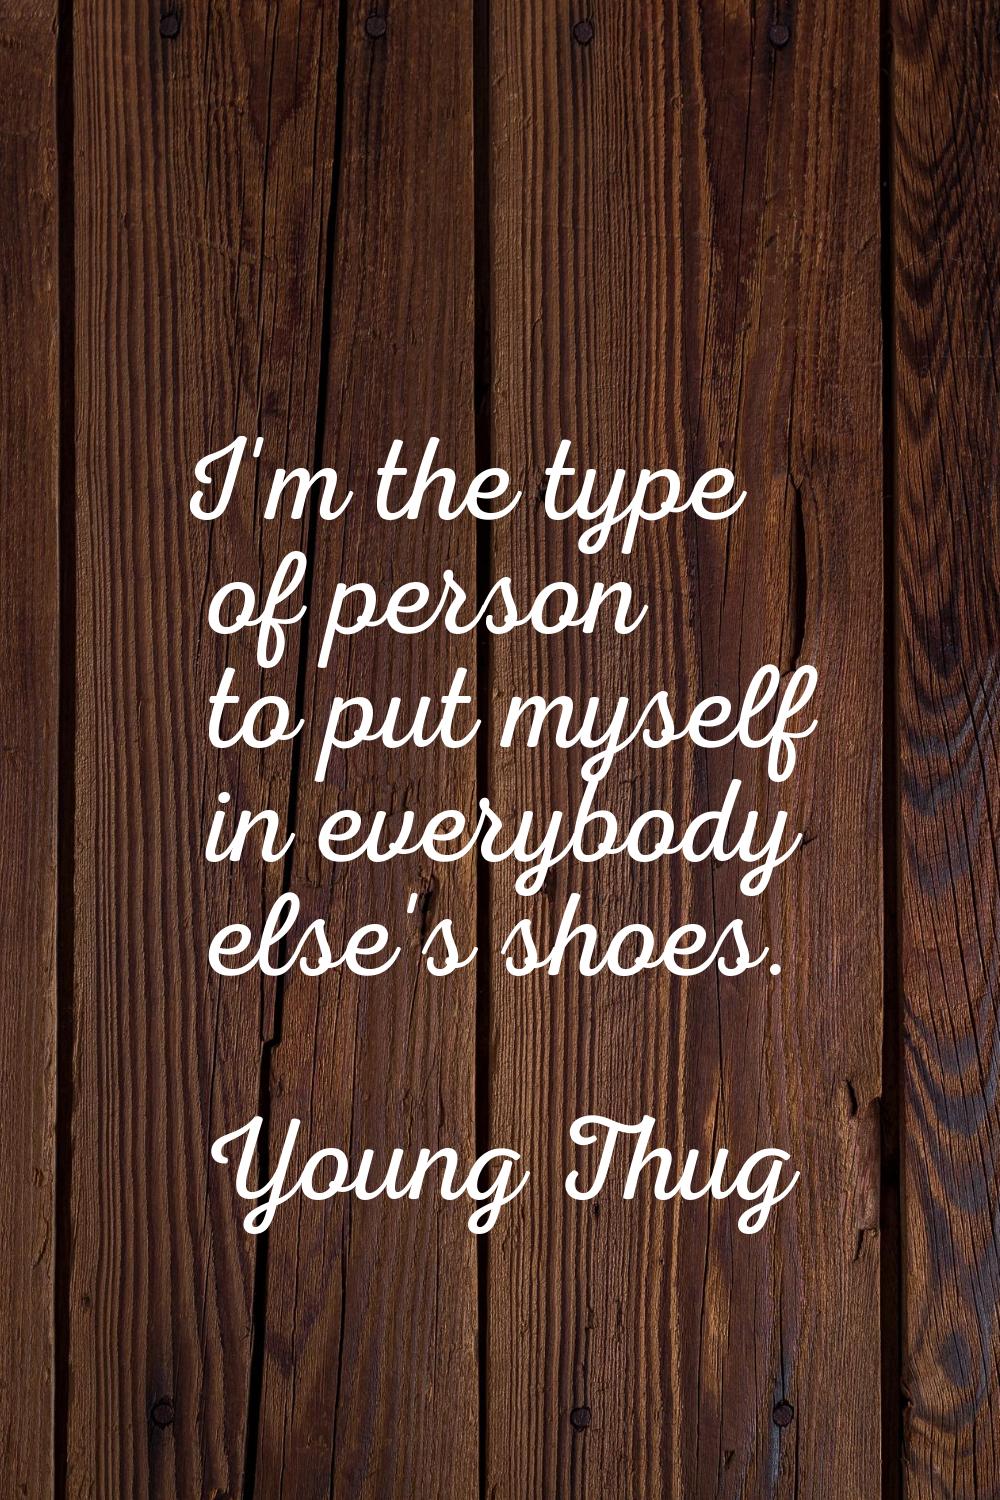 I'm the type of person to put myself in everybody else's shoes.